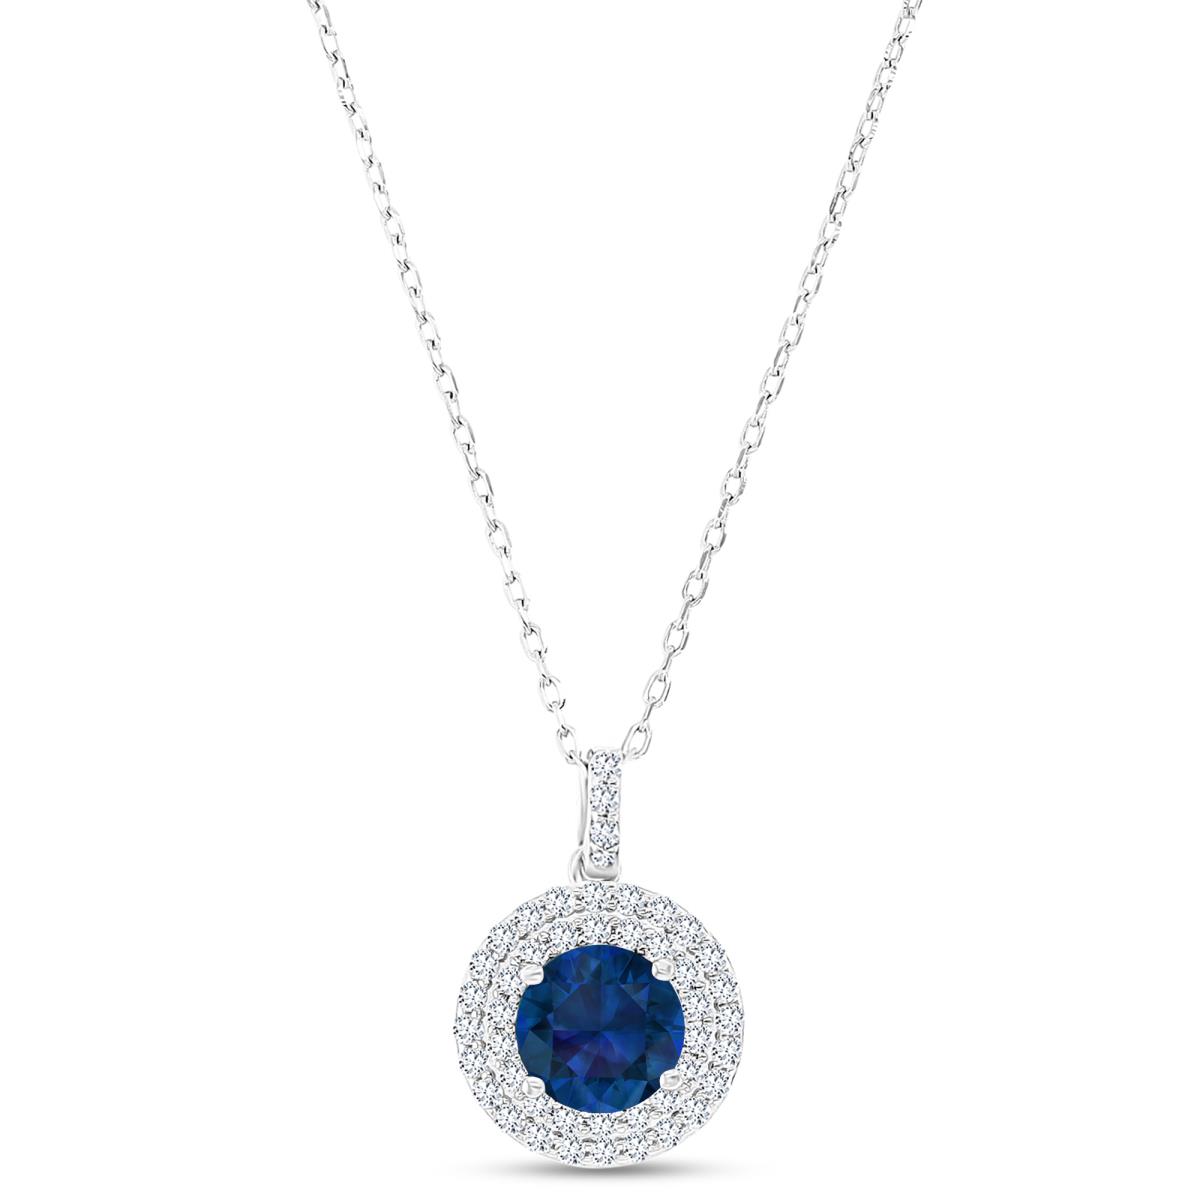 Sterling Silver Rhodium 7mm RD Cr Blue Sapphire / Cr White Sapphire Duble Halo 16"+2" Necklace